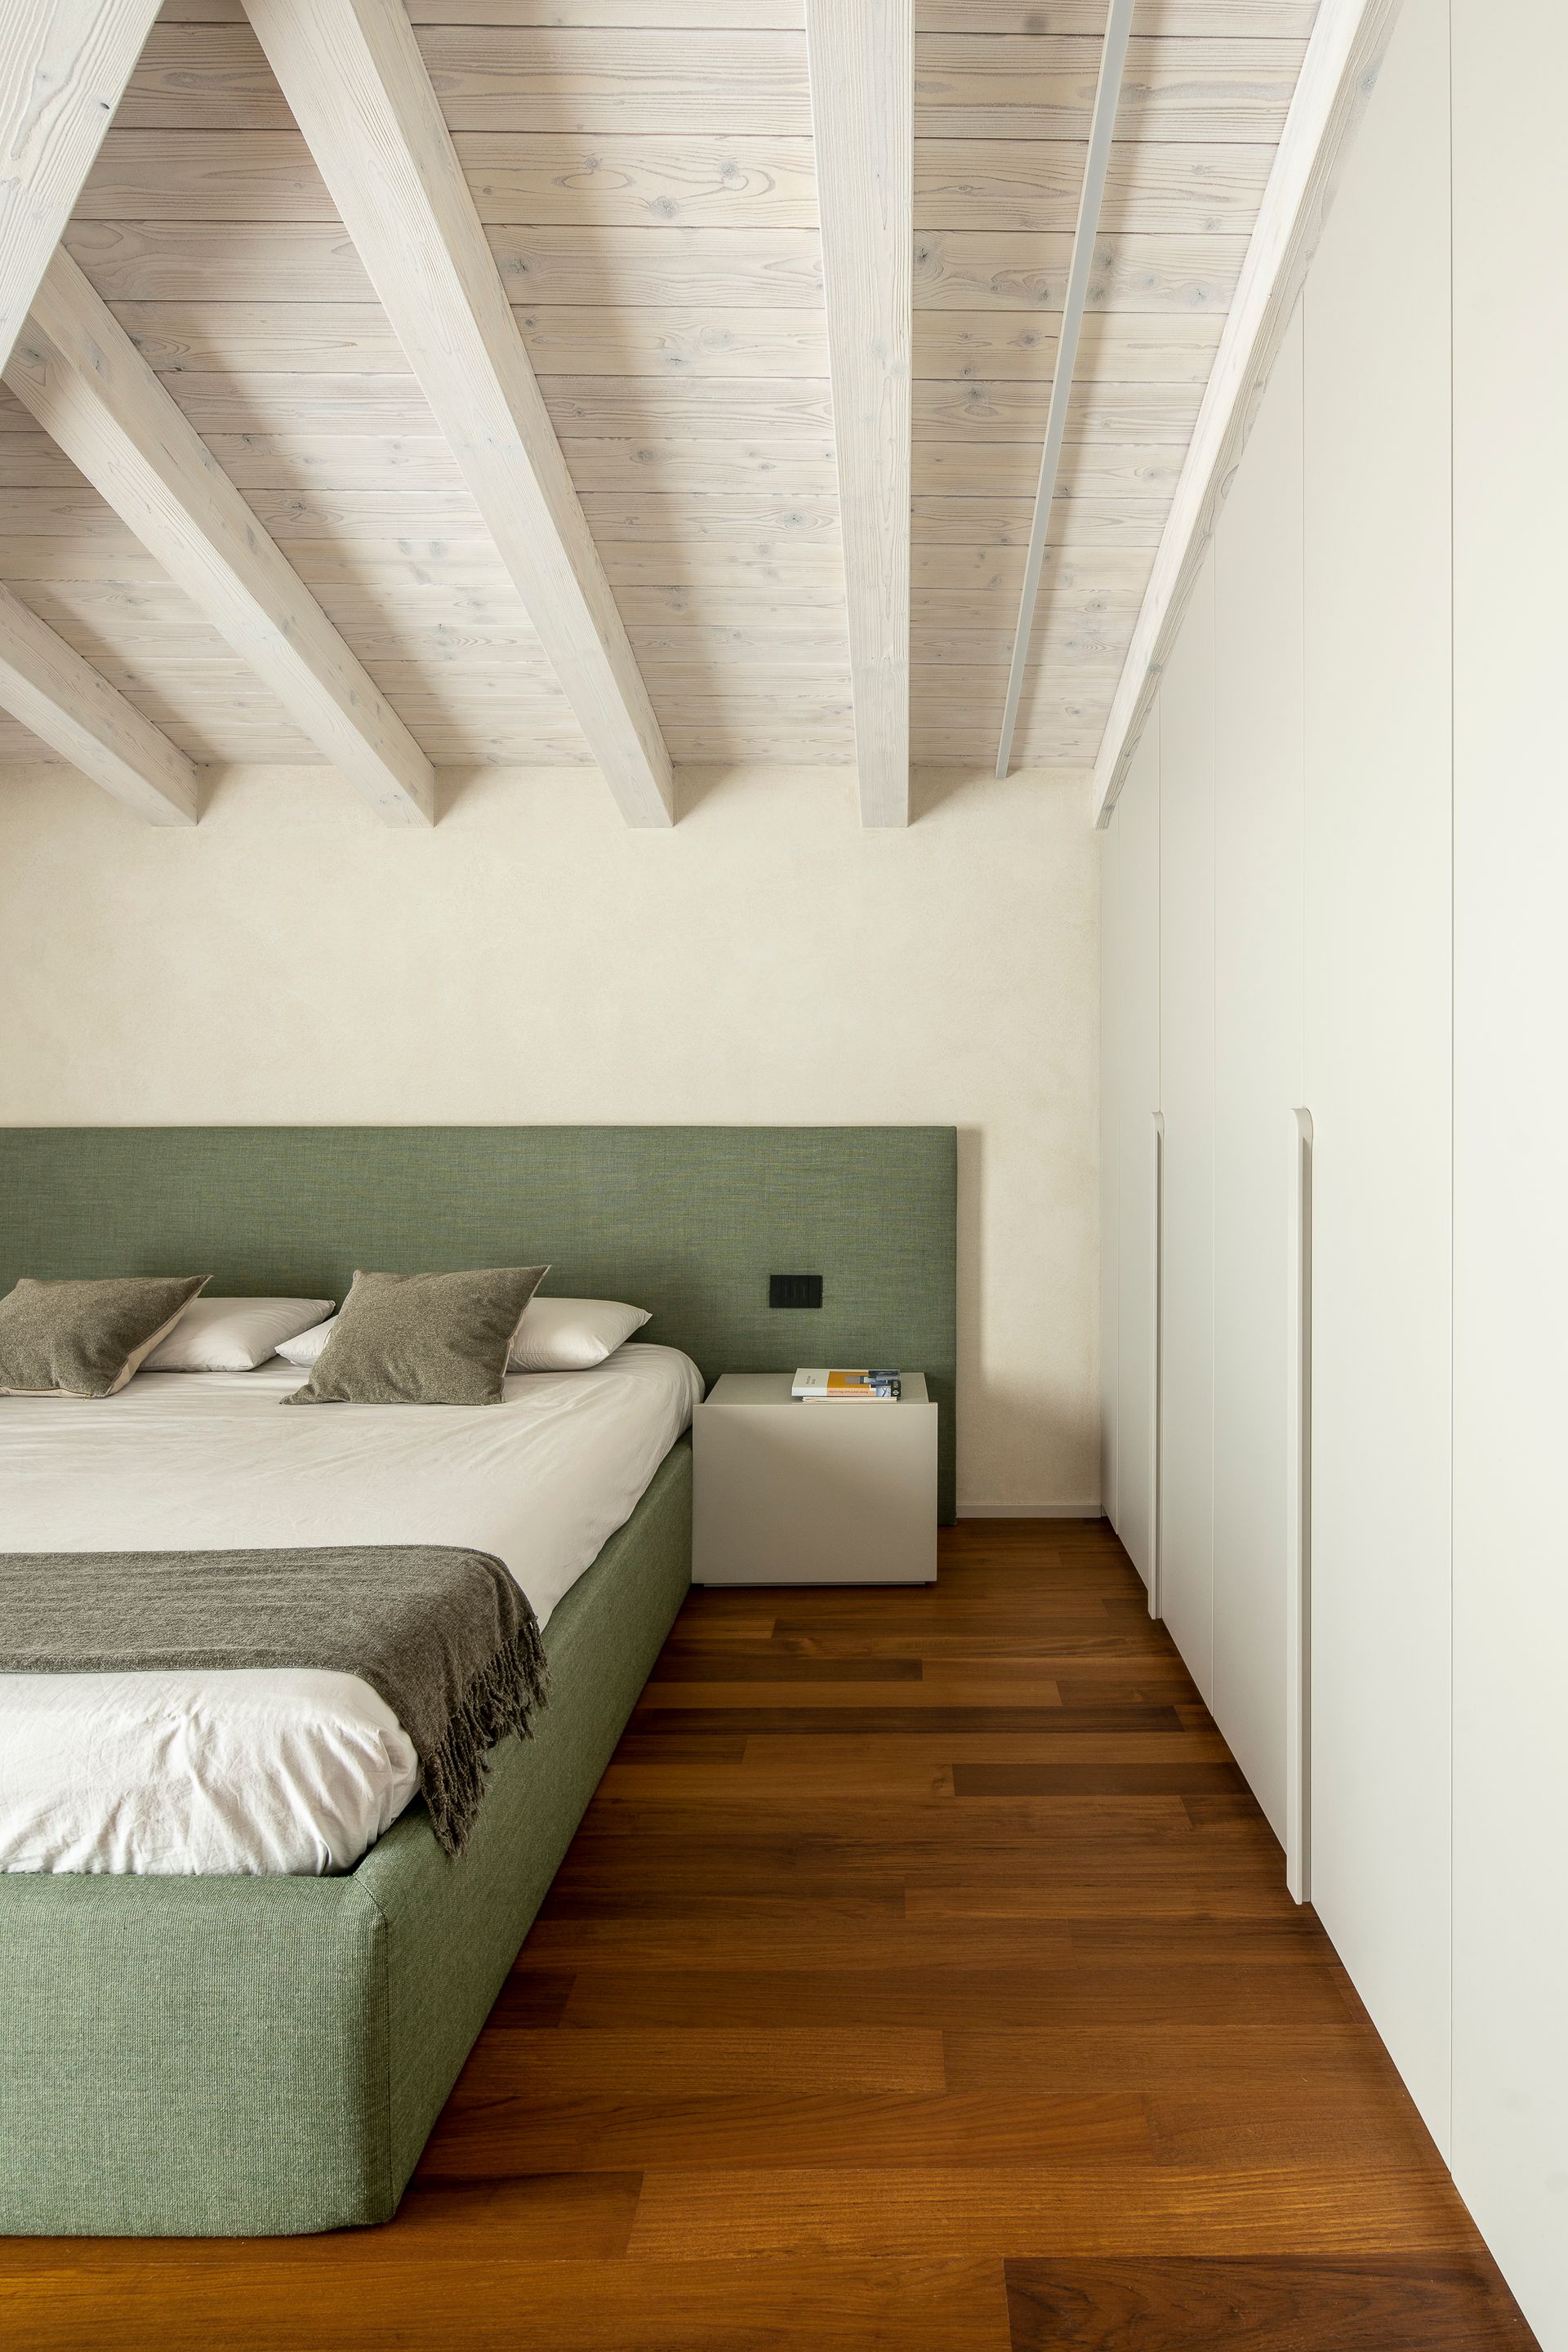 Interior design project, attic renovation with terrace with a view Bergamo, Milan, Lake Como, London, New York, Paris, Gstaad. Officina Magisafi architecture design - bedroom furniture detail